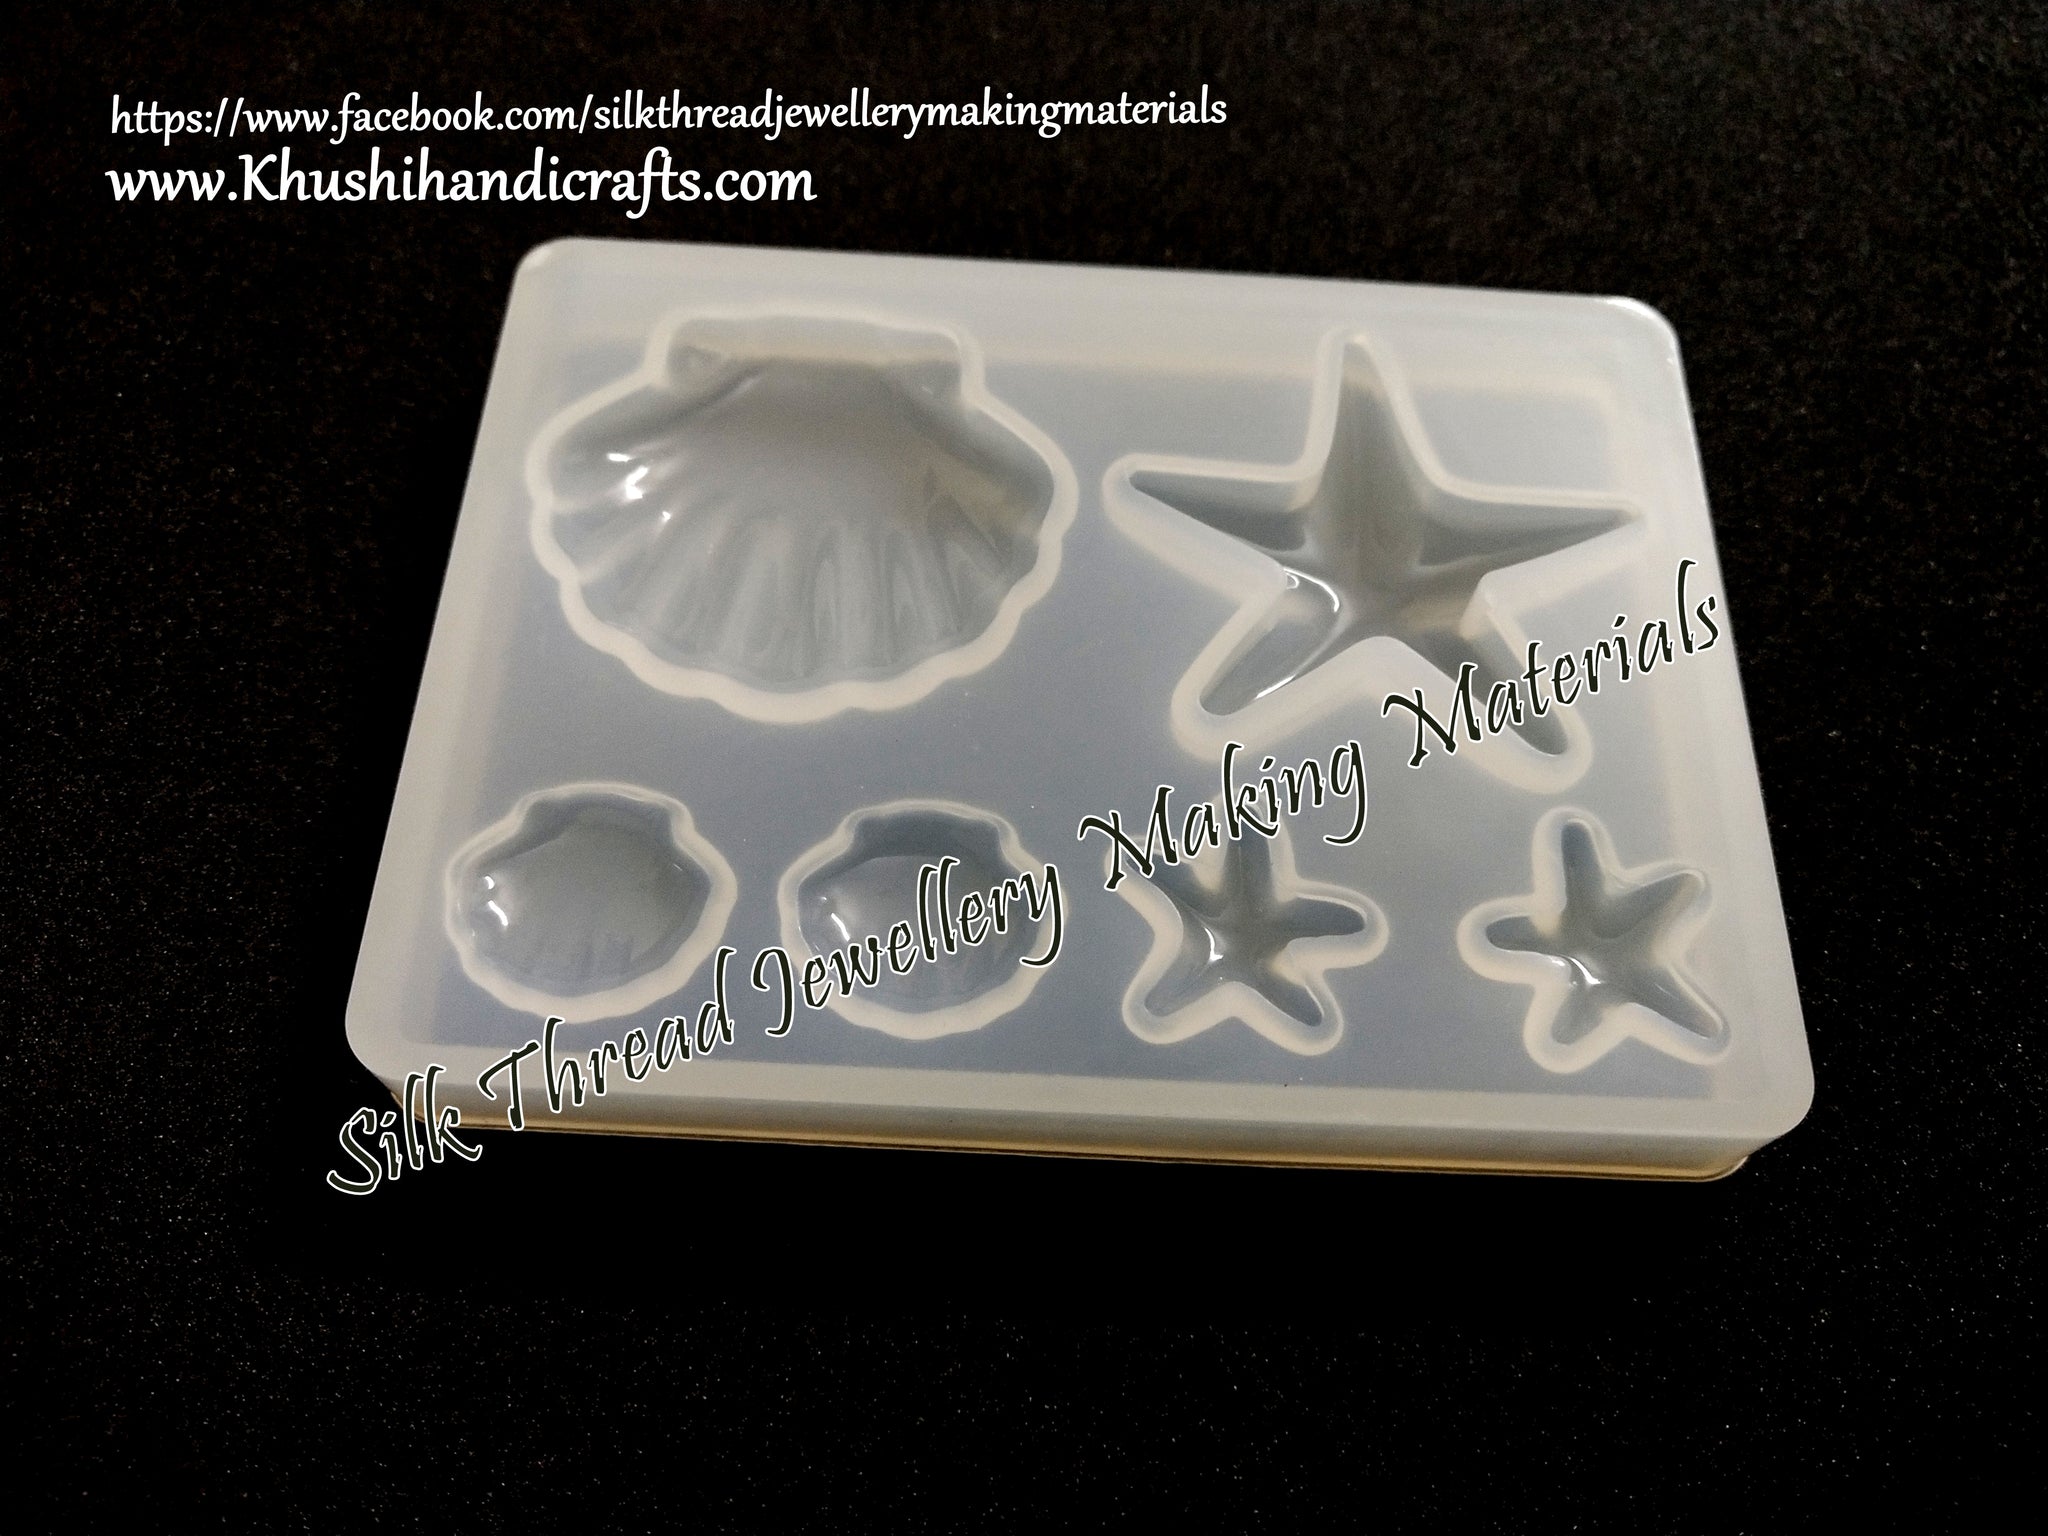 How to use silicone mold maker and casting with uv resin